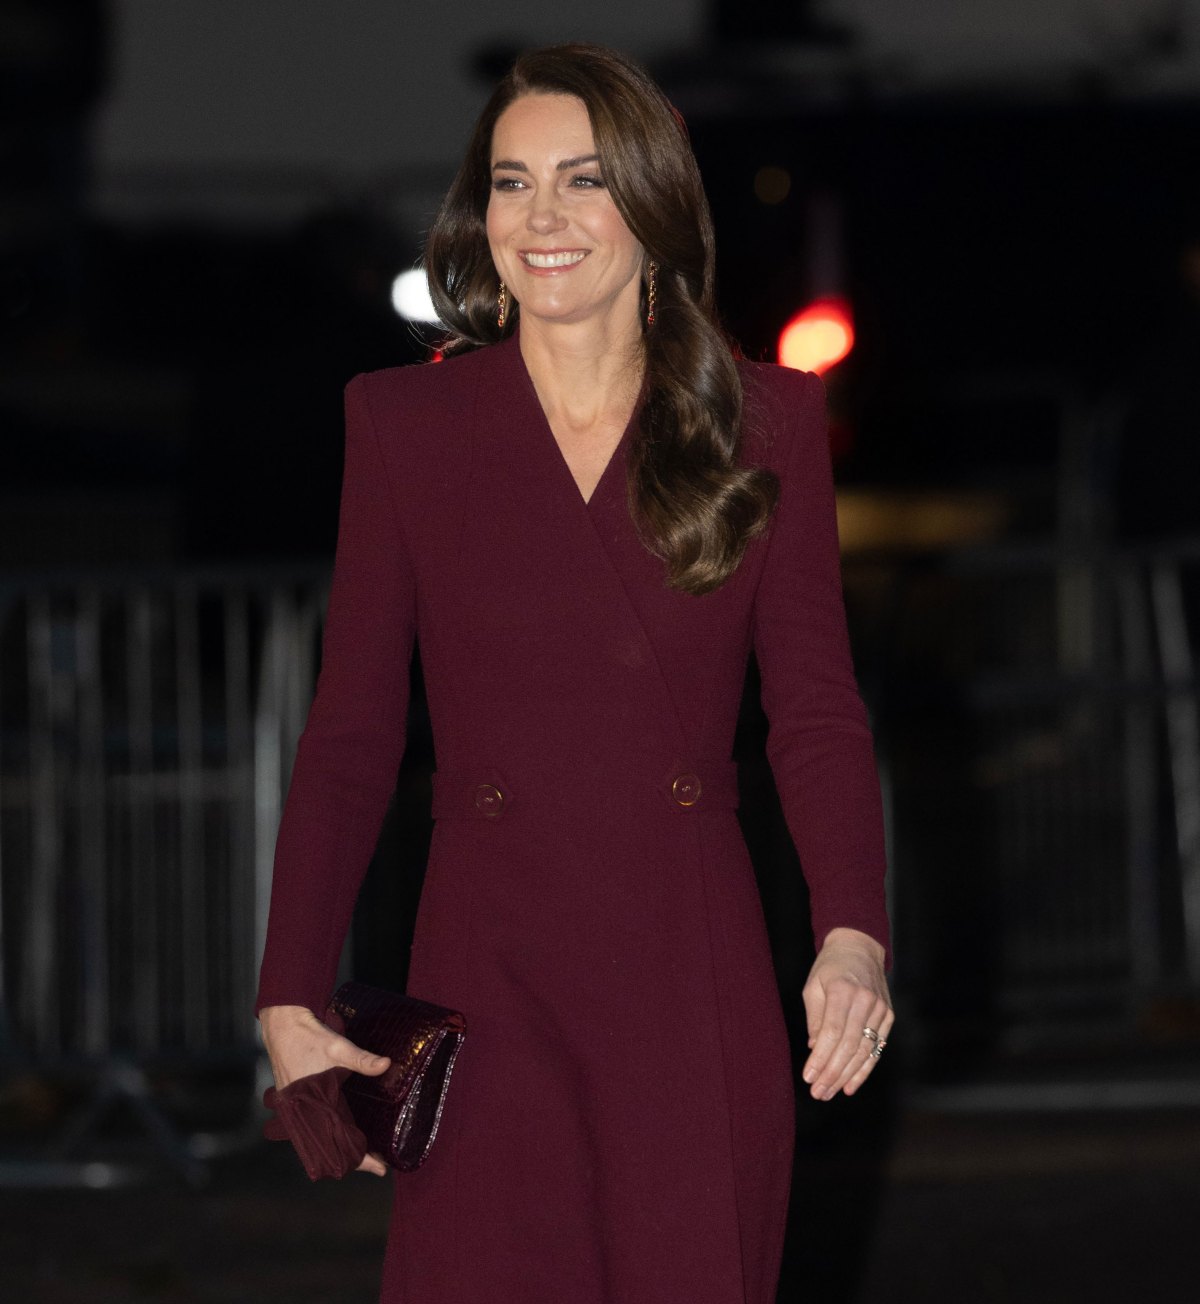 Kate Middleton Wears Gorgeous Two-Tone Gucci Dress to Gala Dinner